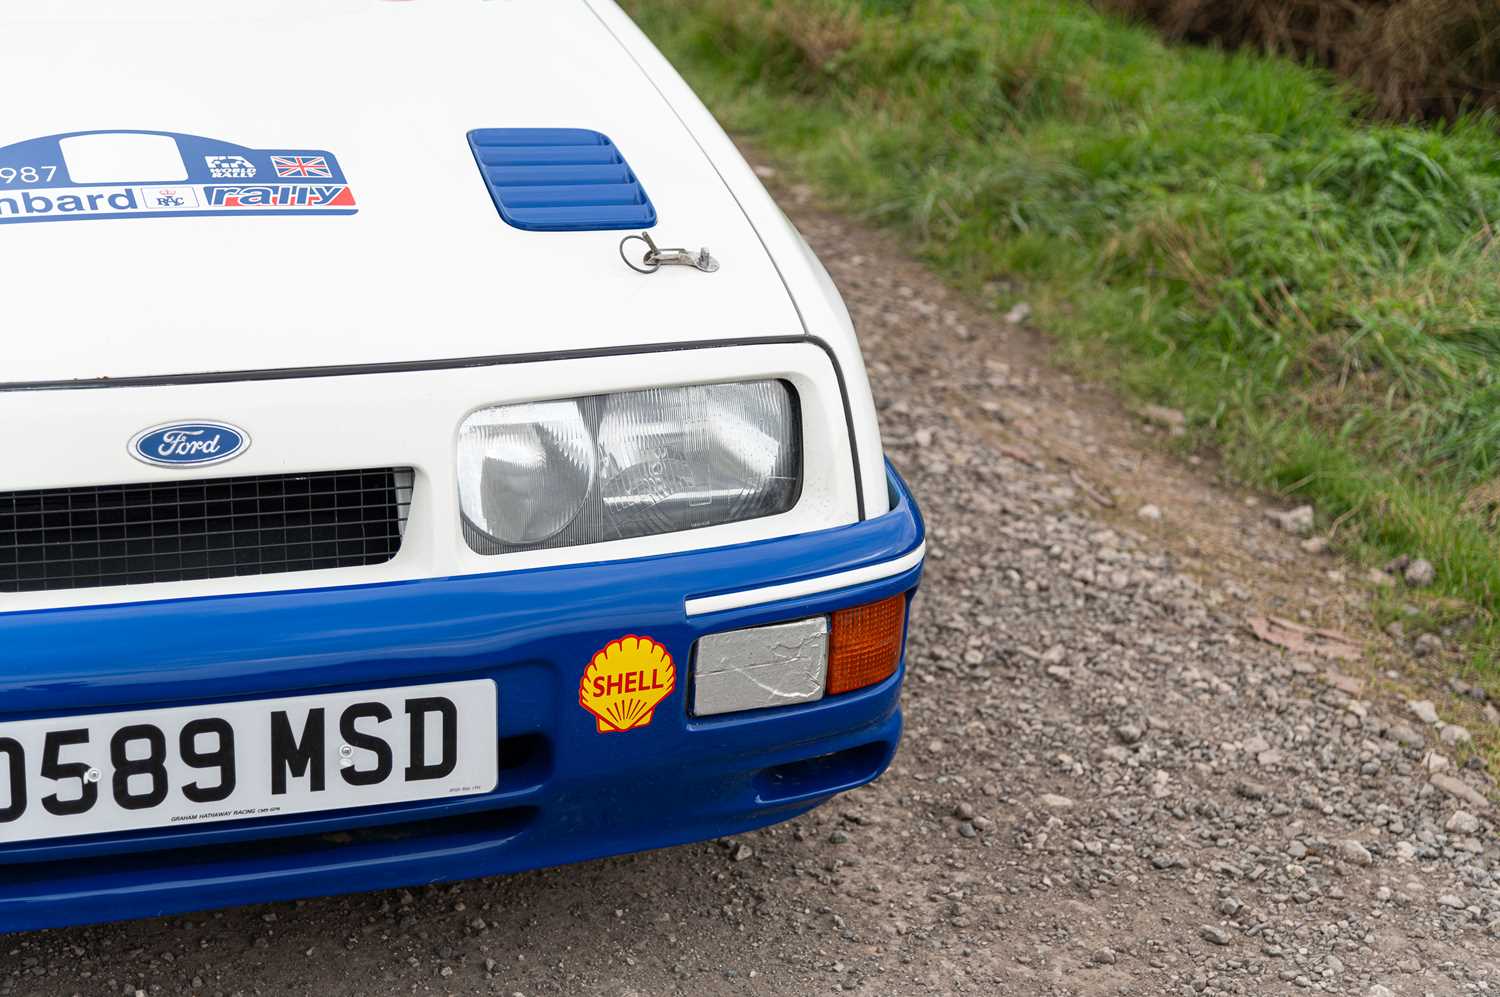 1986 Ford Sierra RS Cosworth - Image 15 of 73